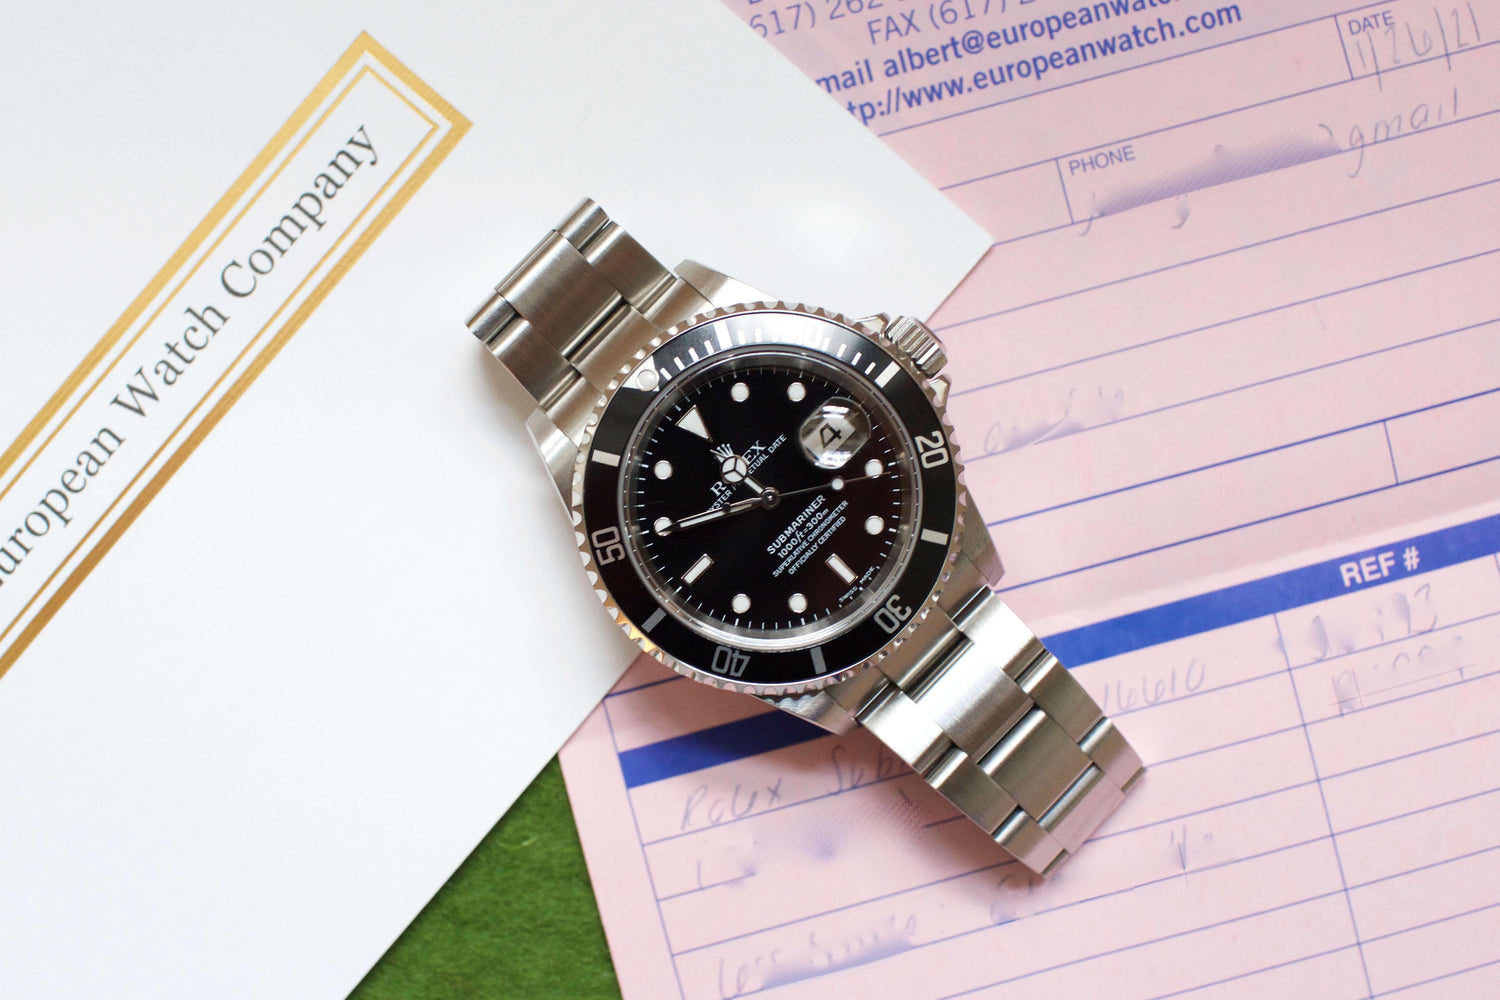 SOLDOUT: Rolex Submariner Date 16610T with Receipt from EWC - WearingTime Luxury Watches